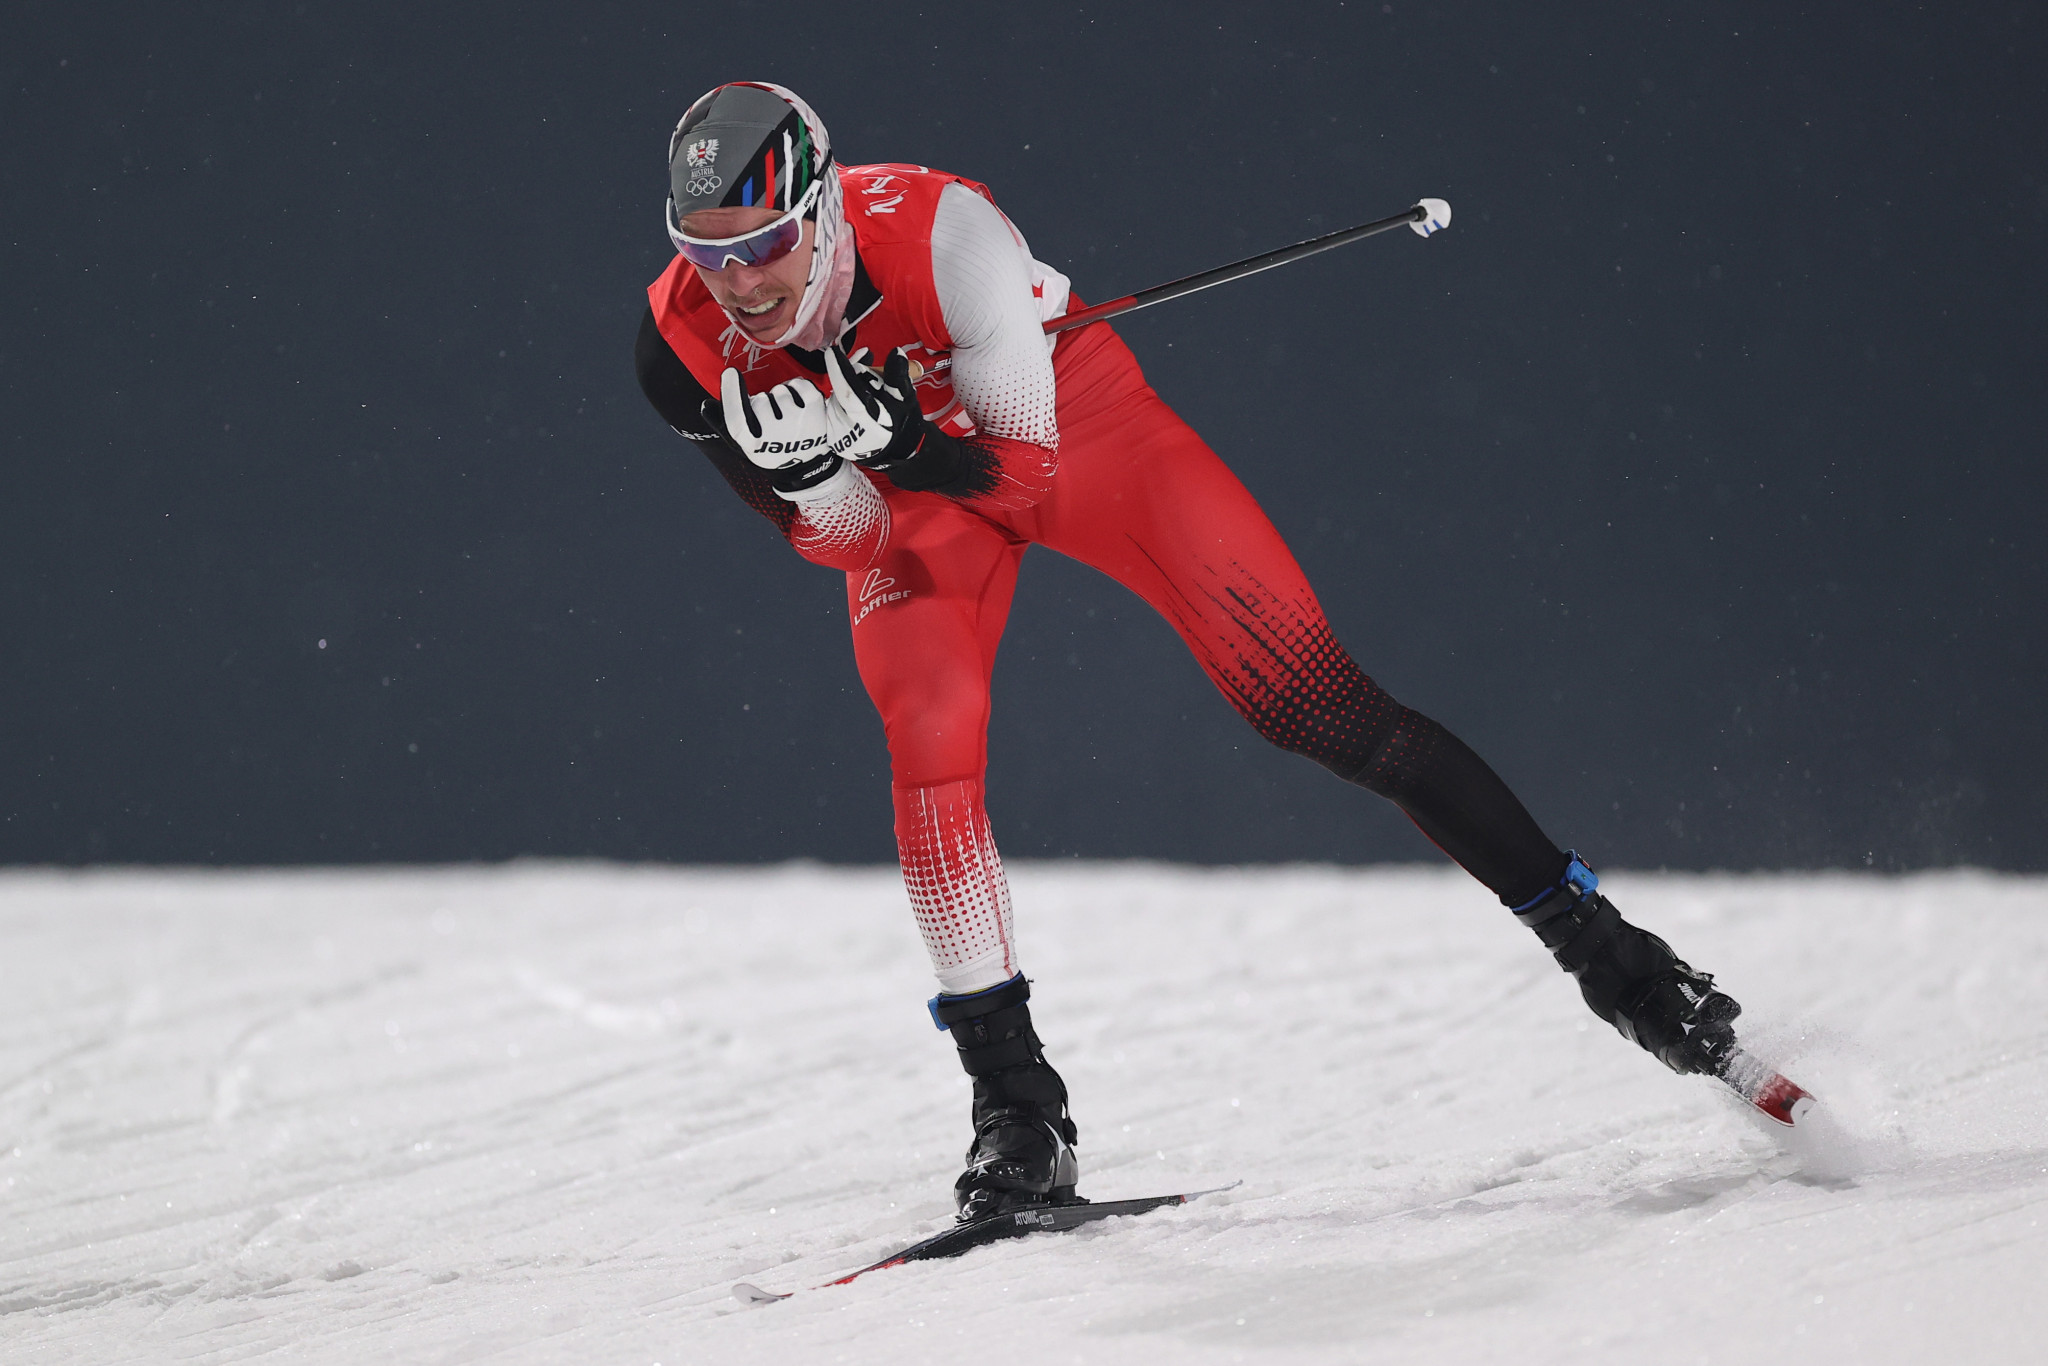 Leader Lamparter earns third consecutive Nordic Combined World Cup win in Oberstdorf